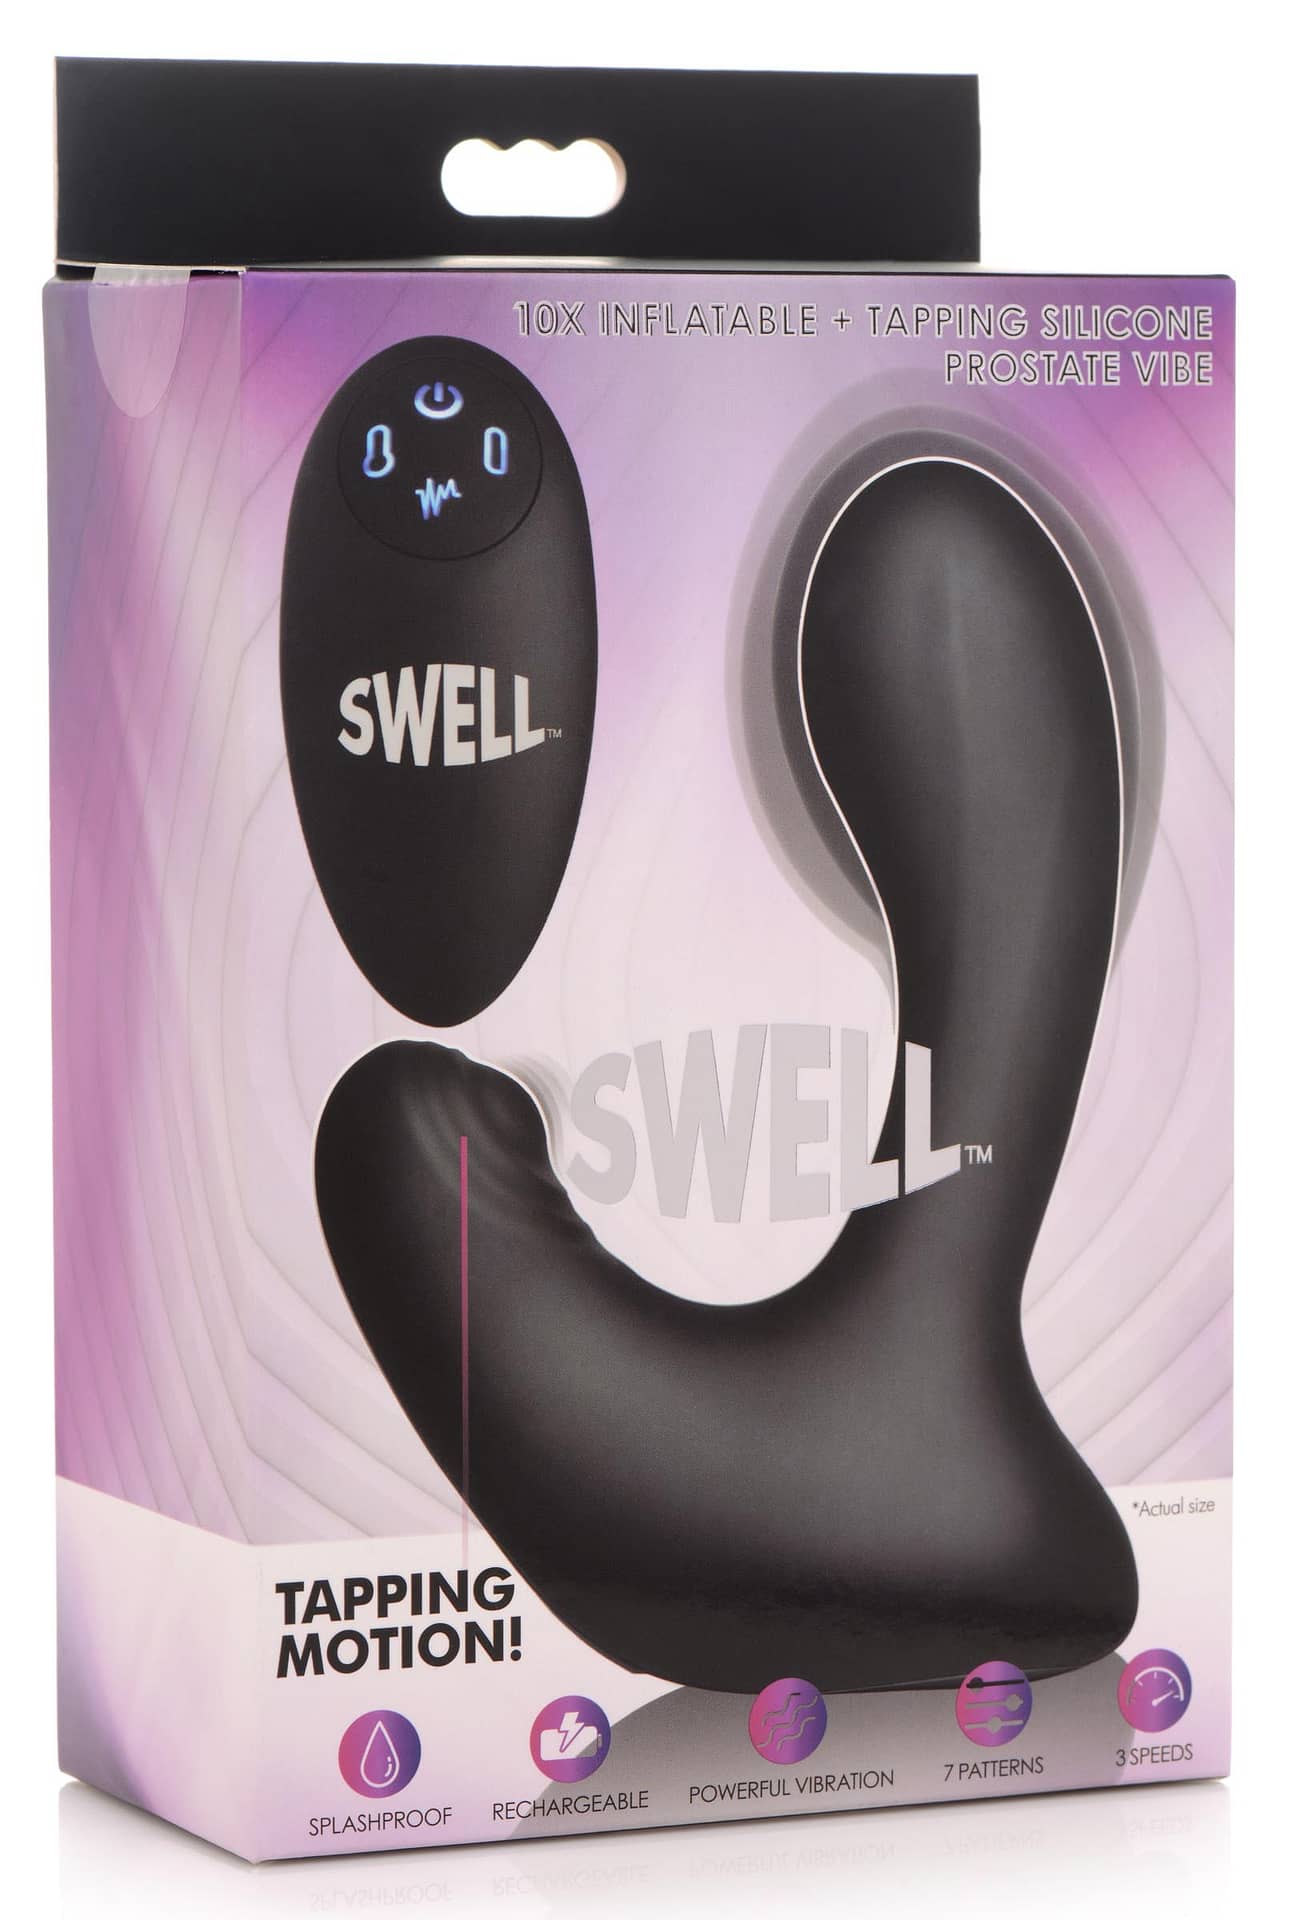 10x Inflatable And Tapping Silicone Prostate Vibrator The Bdsm Toy Shop